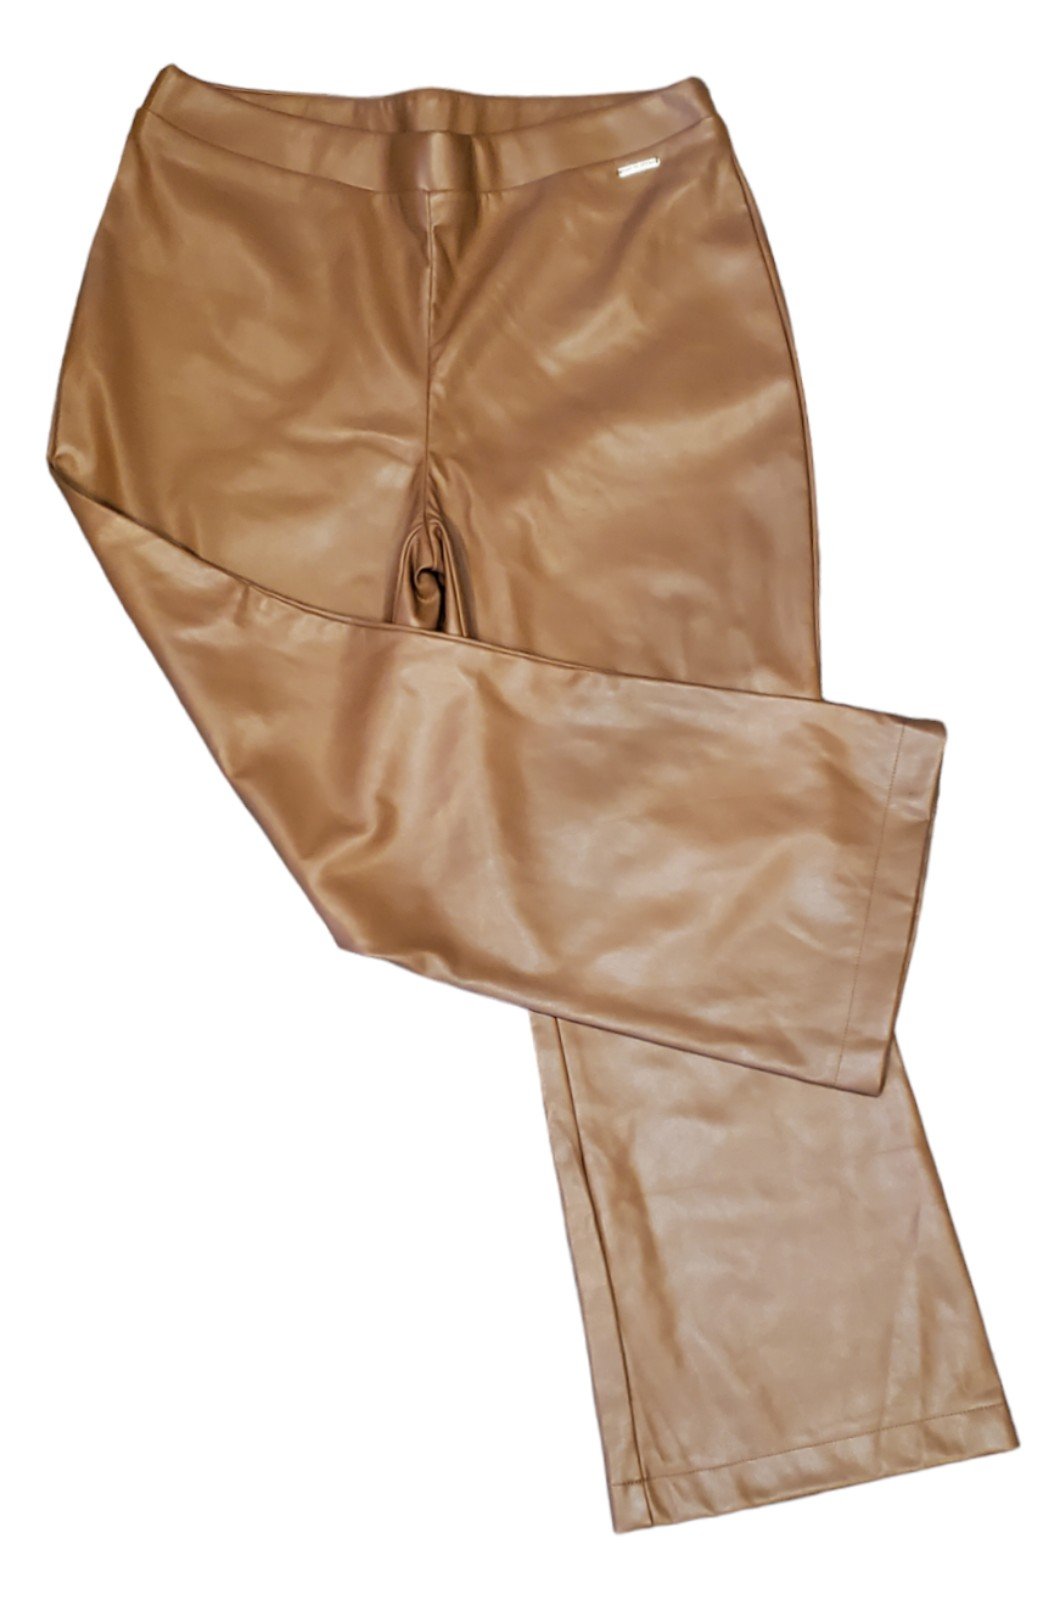 High quality New Marc New York Andrew Marc Women´s Faux Leather Brown Pants GjEIeqwx6 Outlet Store